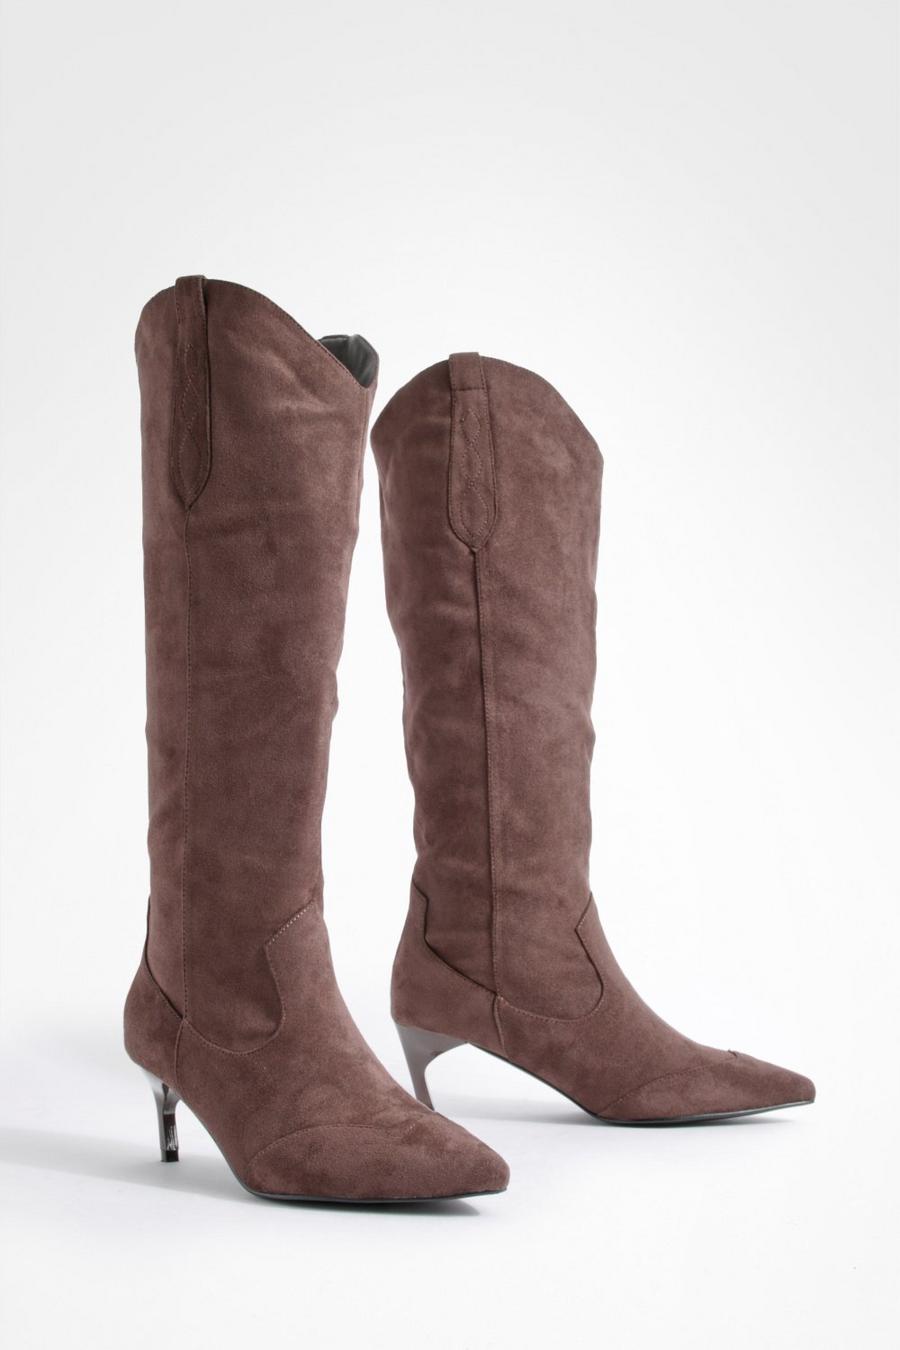 Chocolate brown Western Detail Low Knee High Boots